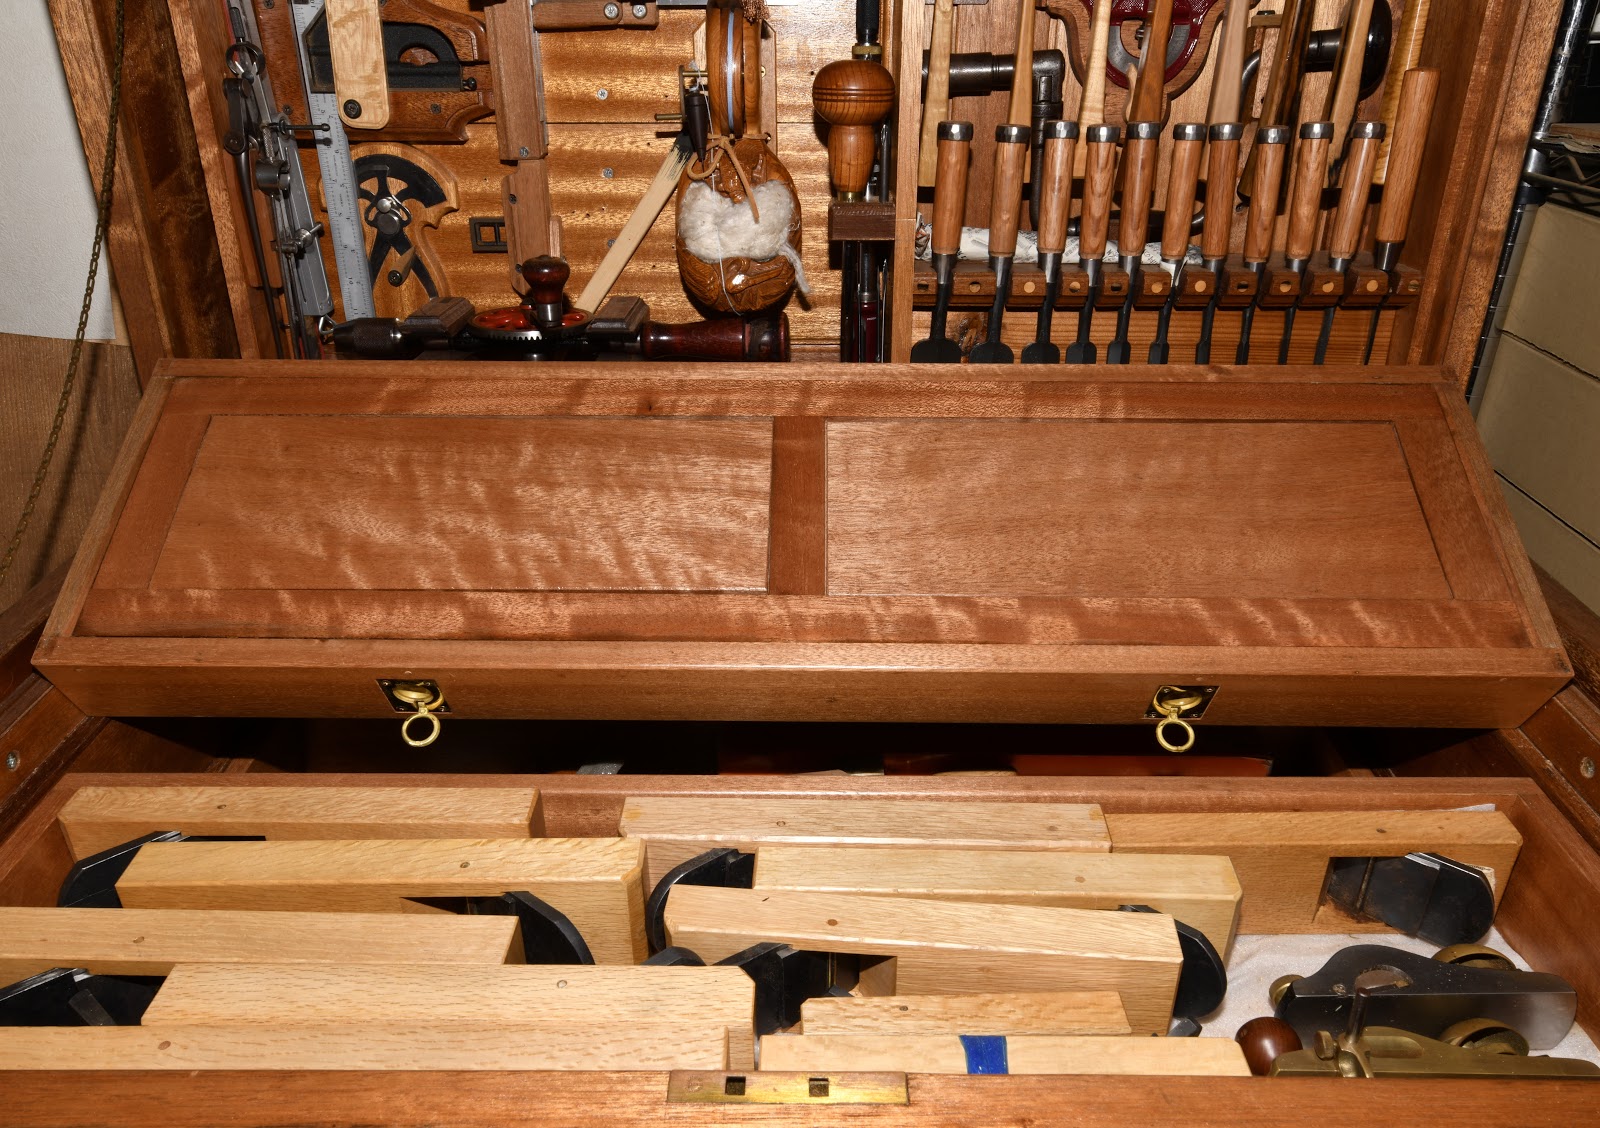 The story behind the project: cypress plate rack - FineWoodworking